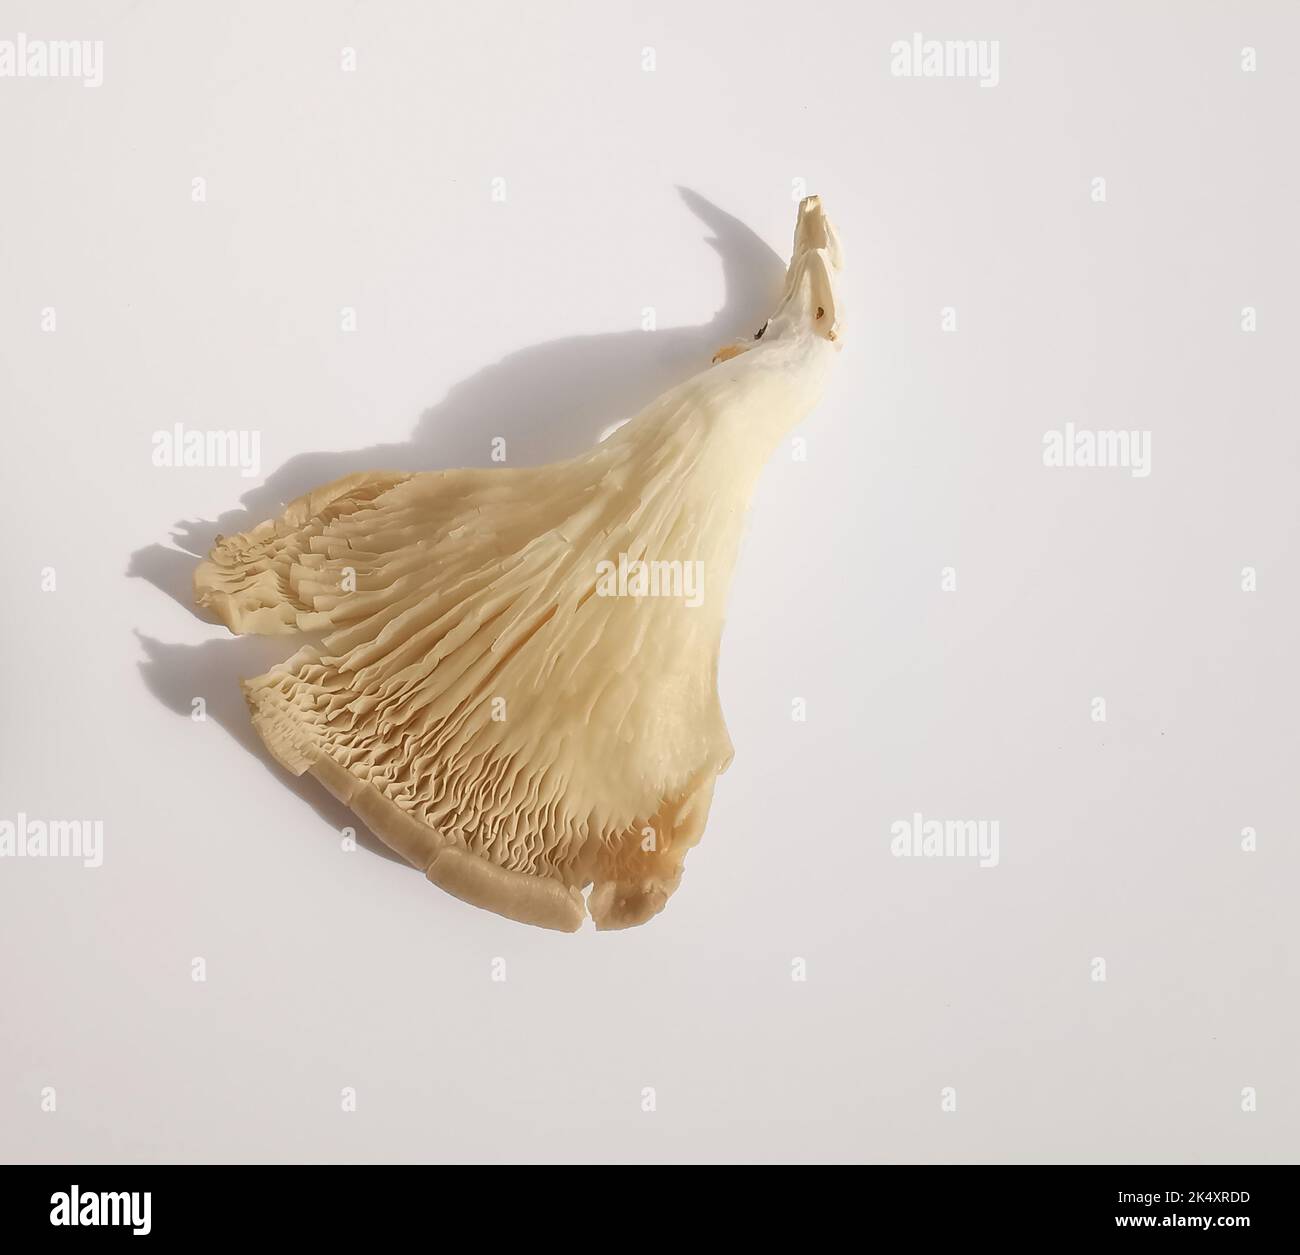 Single oyster mushroom against plain white background with copy space Stock Photo